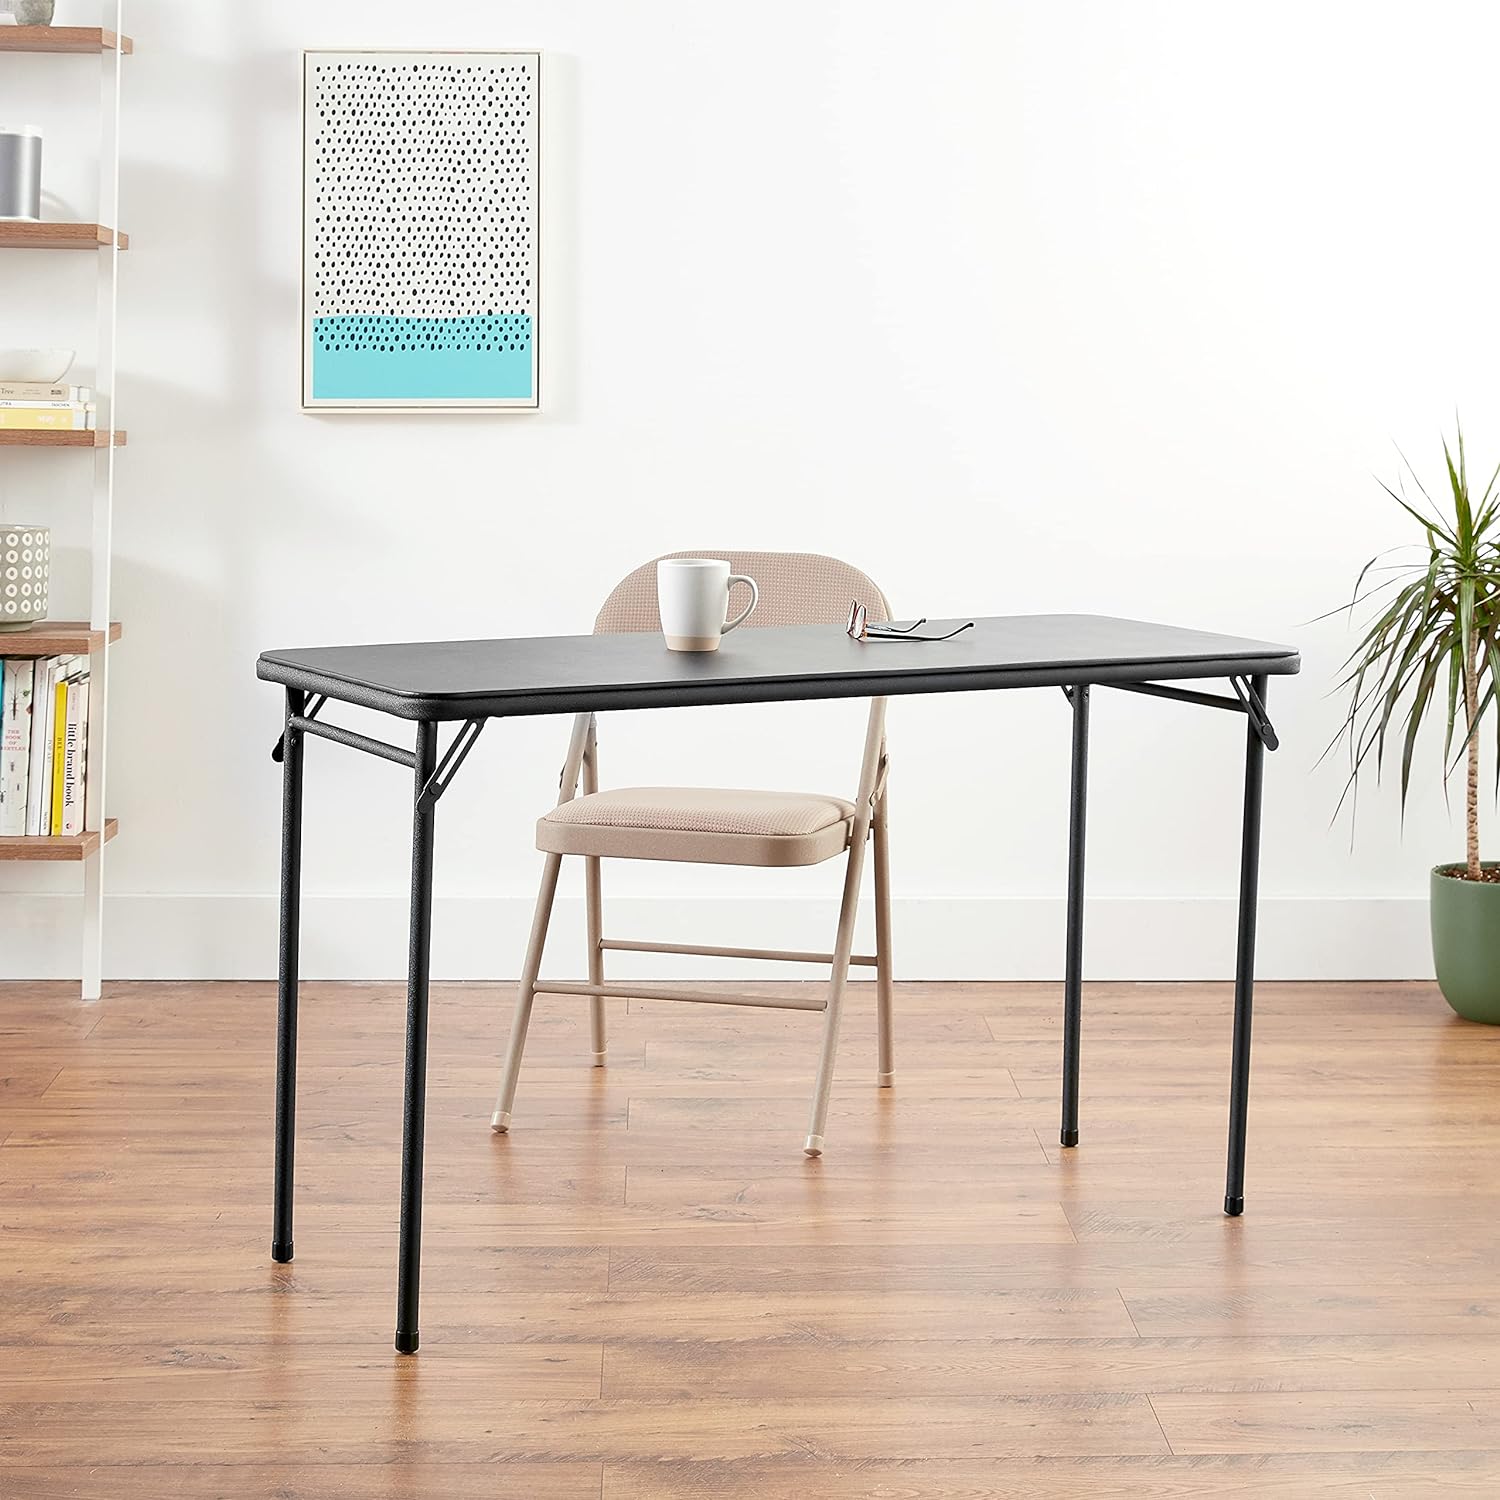 CoscoProducts Cosco 20" x 48" Vinyl Top Folding Table